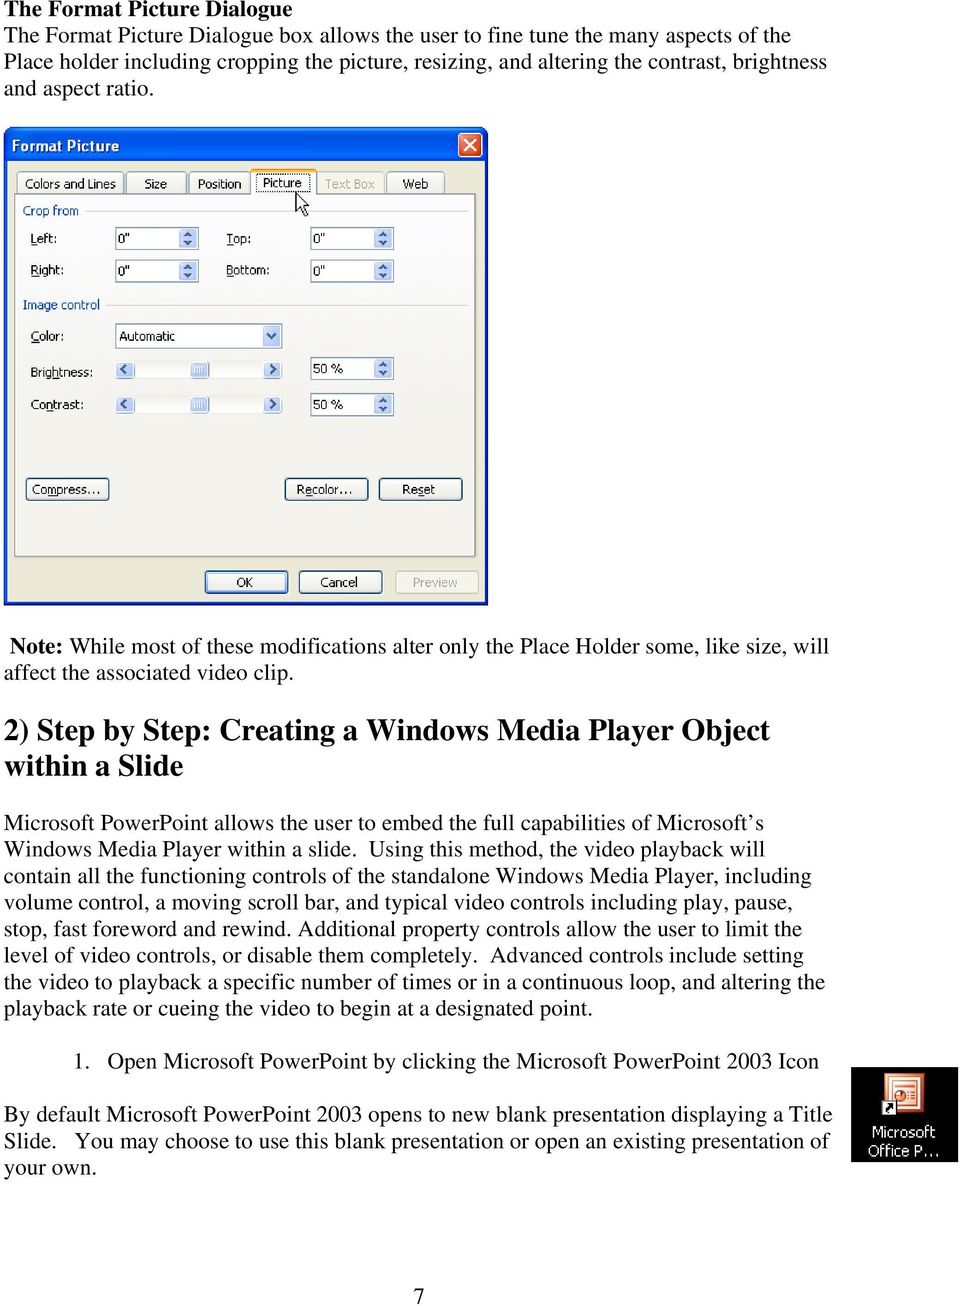 2) Step by Step: Creating a Windows Media Player Object within a Slide Microsoft PowerPoint allows the user to embed the full capabilities of Microsoft s Windows Media Player within a slide.